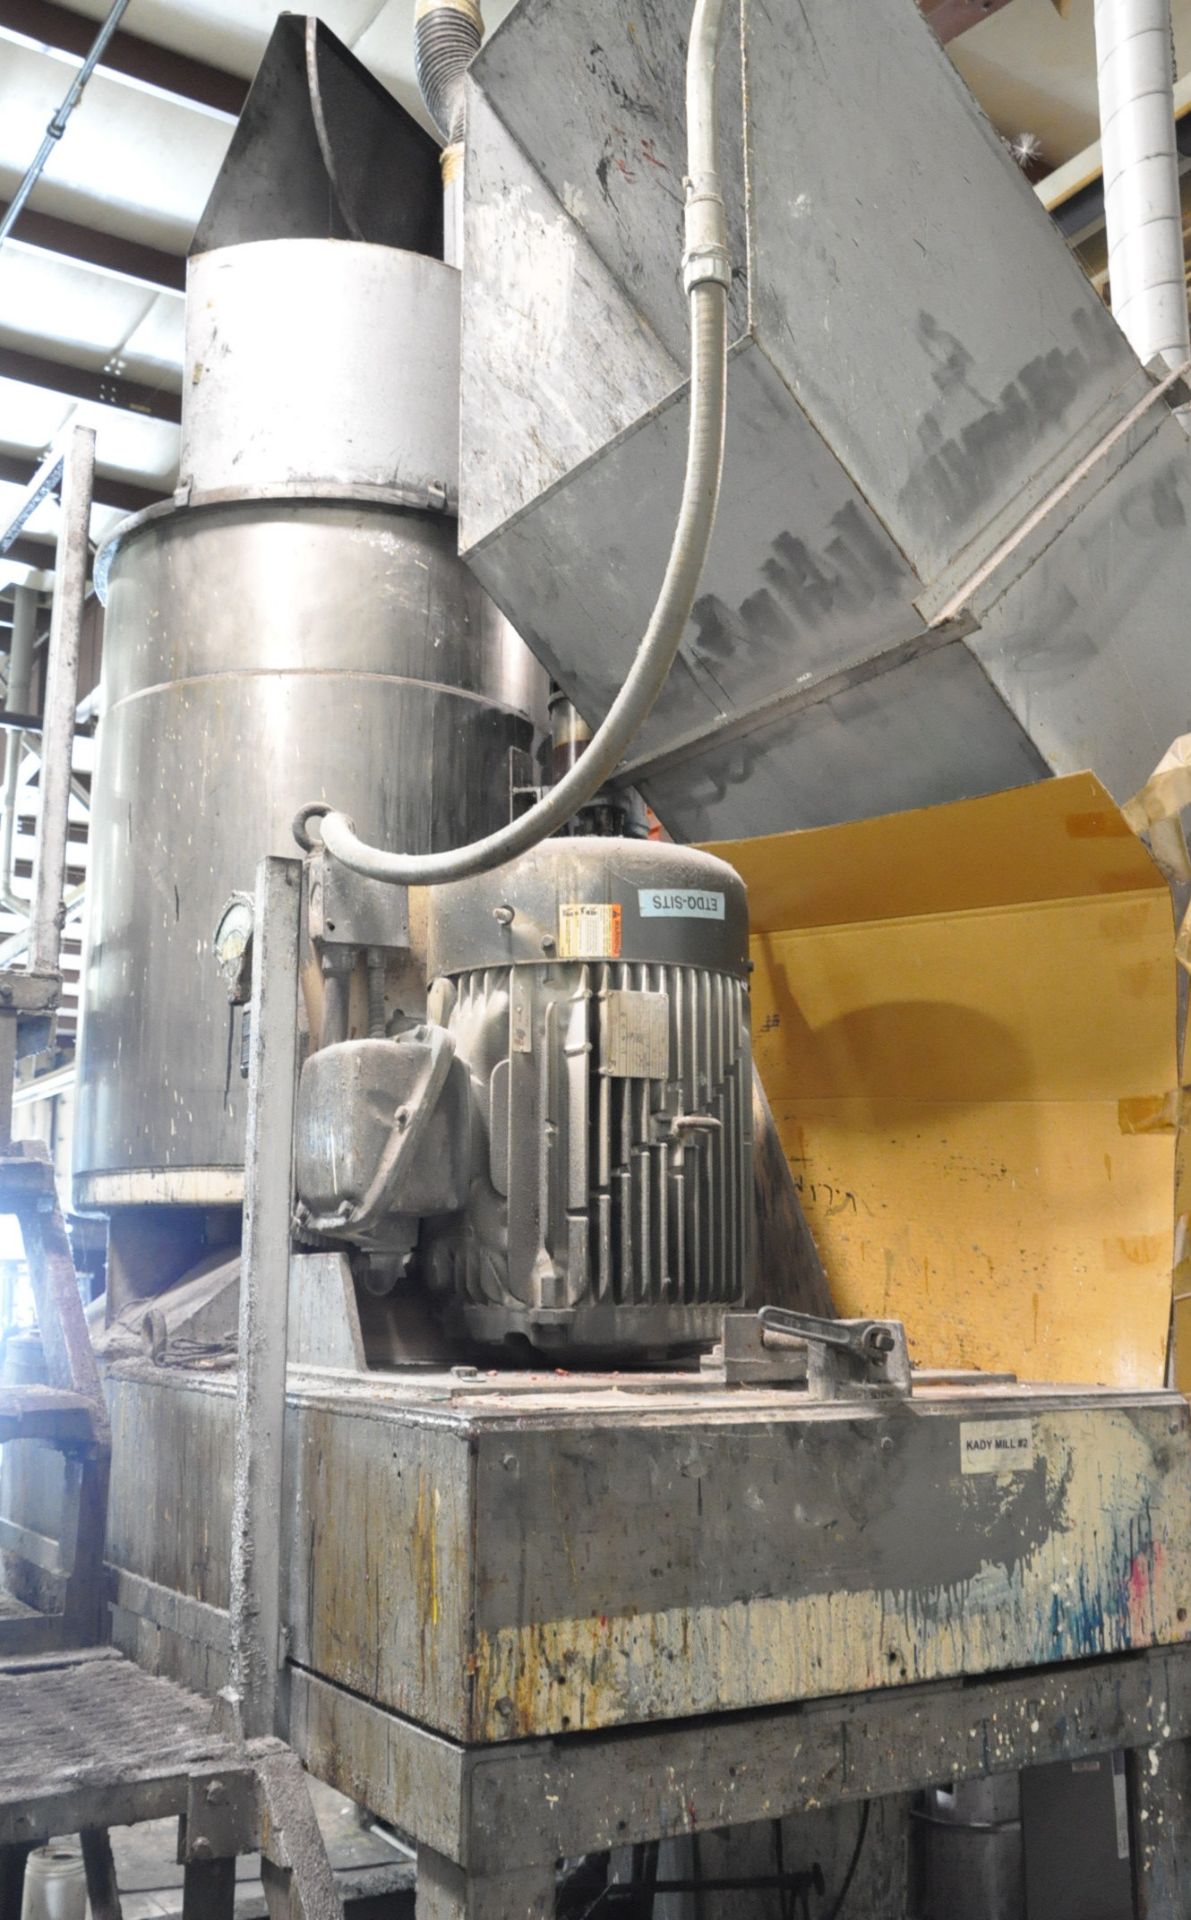 Kady 1,350-Lbs. Capacity Grinding Mill, 50-HP Motor, with Stand and Exhaust Hood - Image 3 of 3